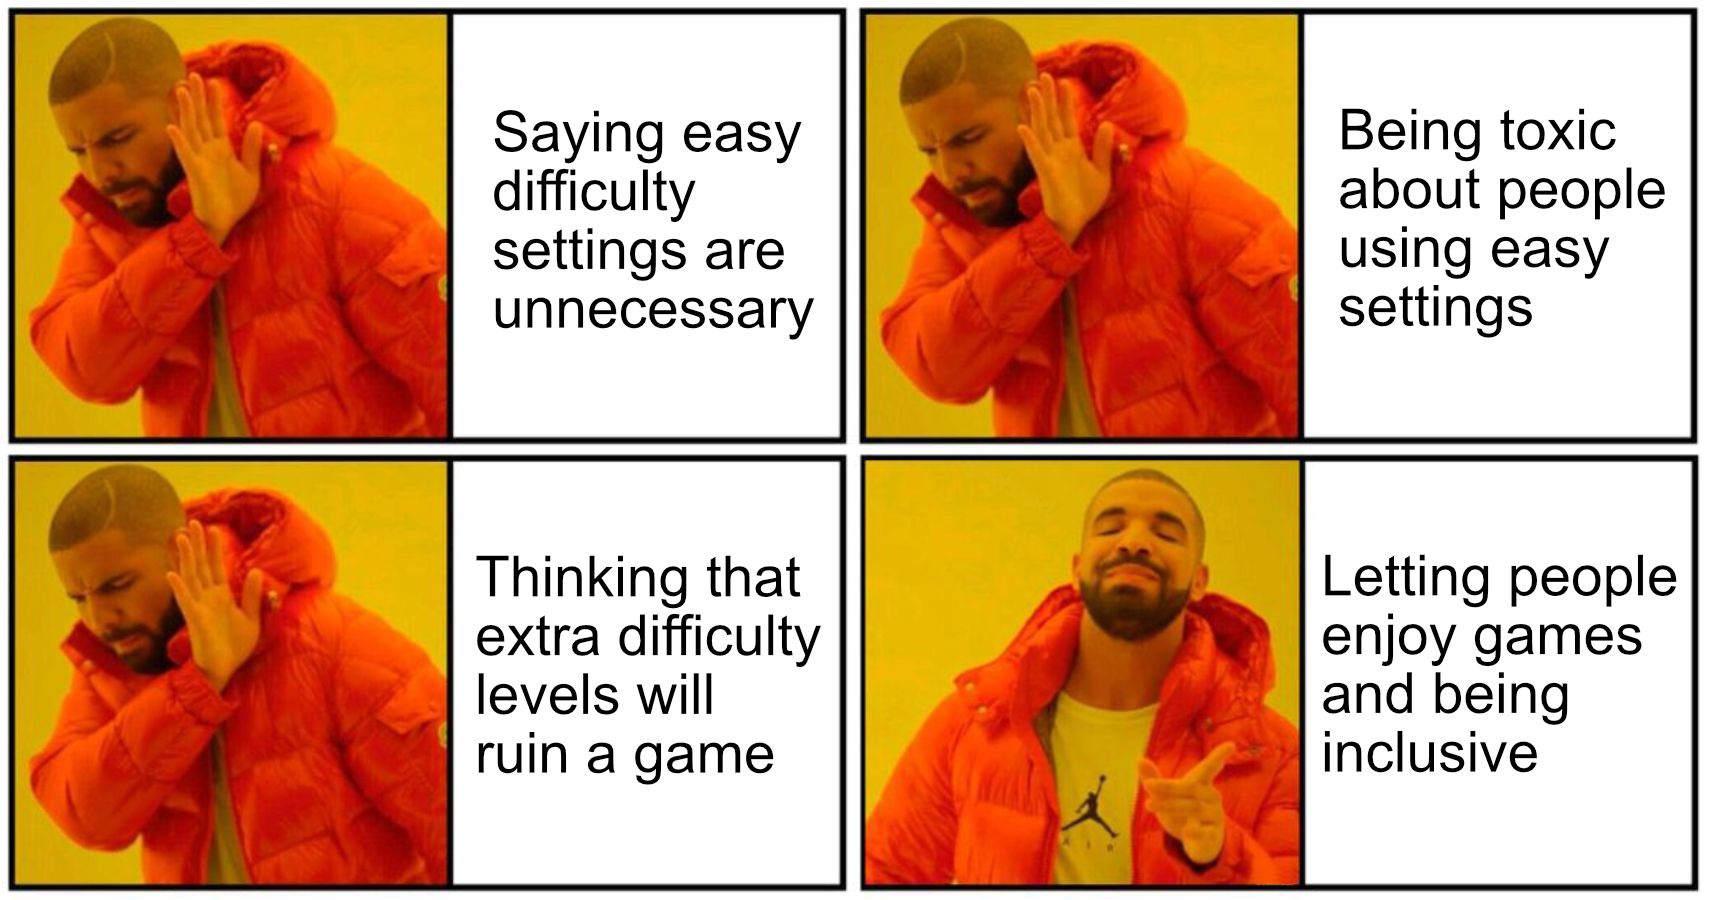 A drake meme with 4 panels. No to saying easy difficulty settings are unnecessary, no to being toxic about people using easy settings and no to thinking that difficulty levels will ruin a game. Yes to letting people enjoy games and being inclusive.